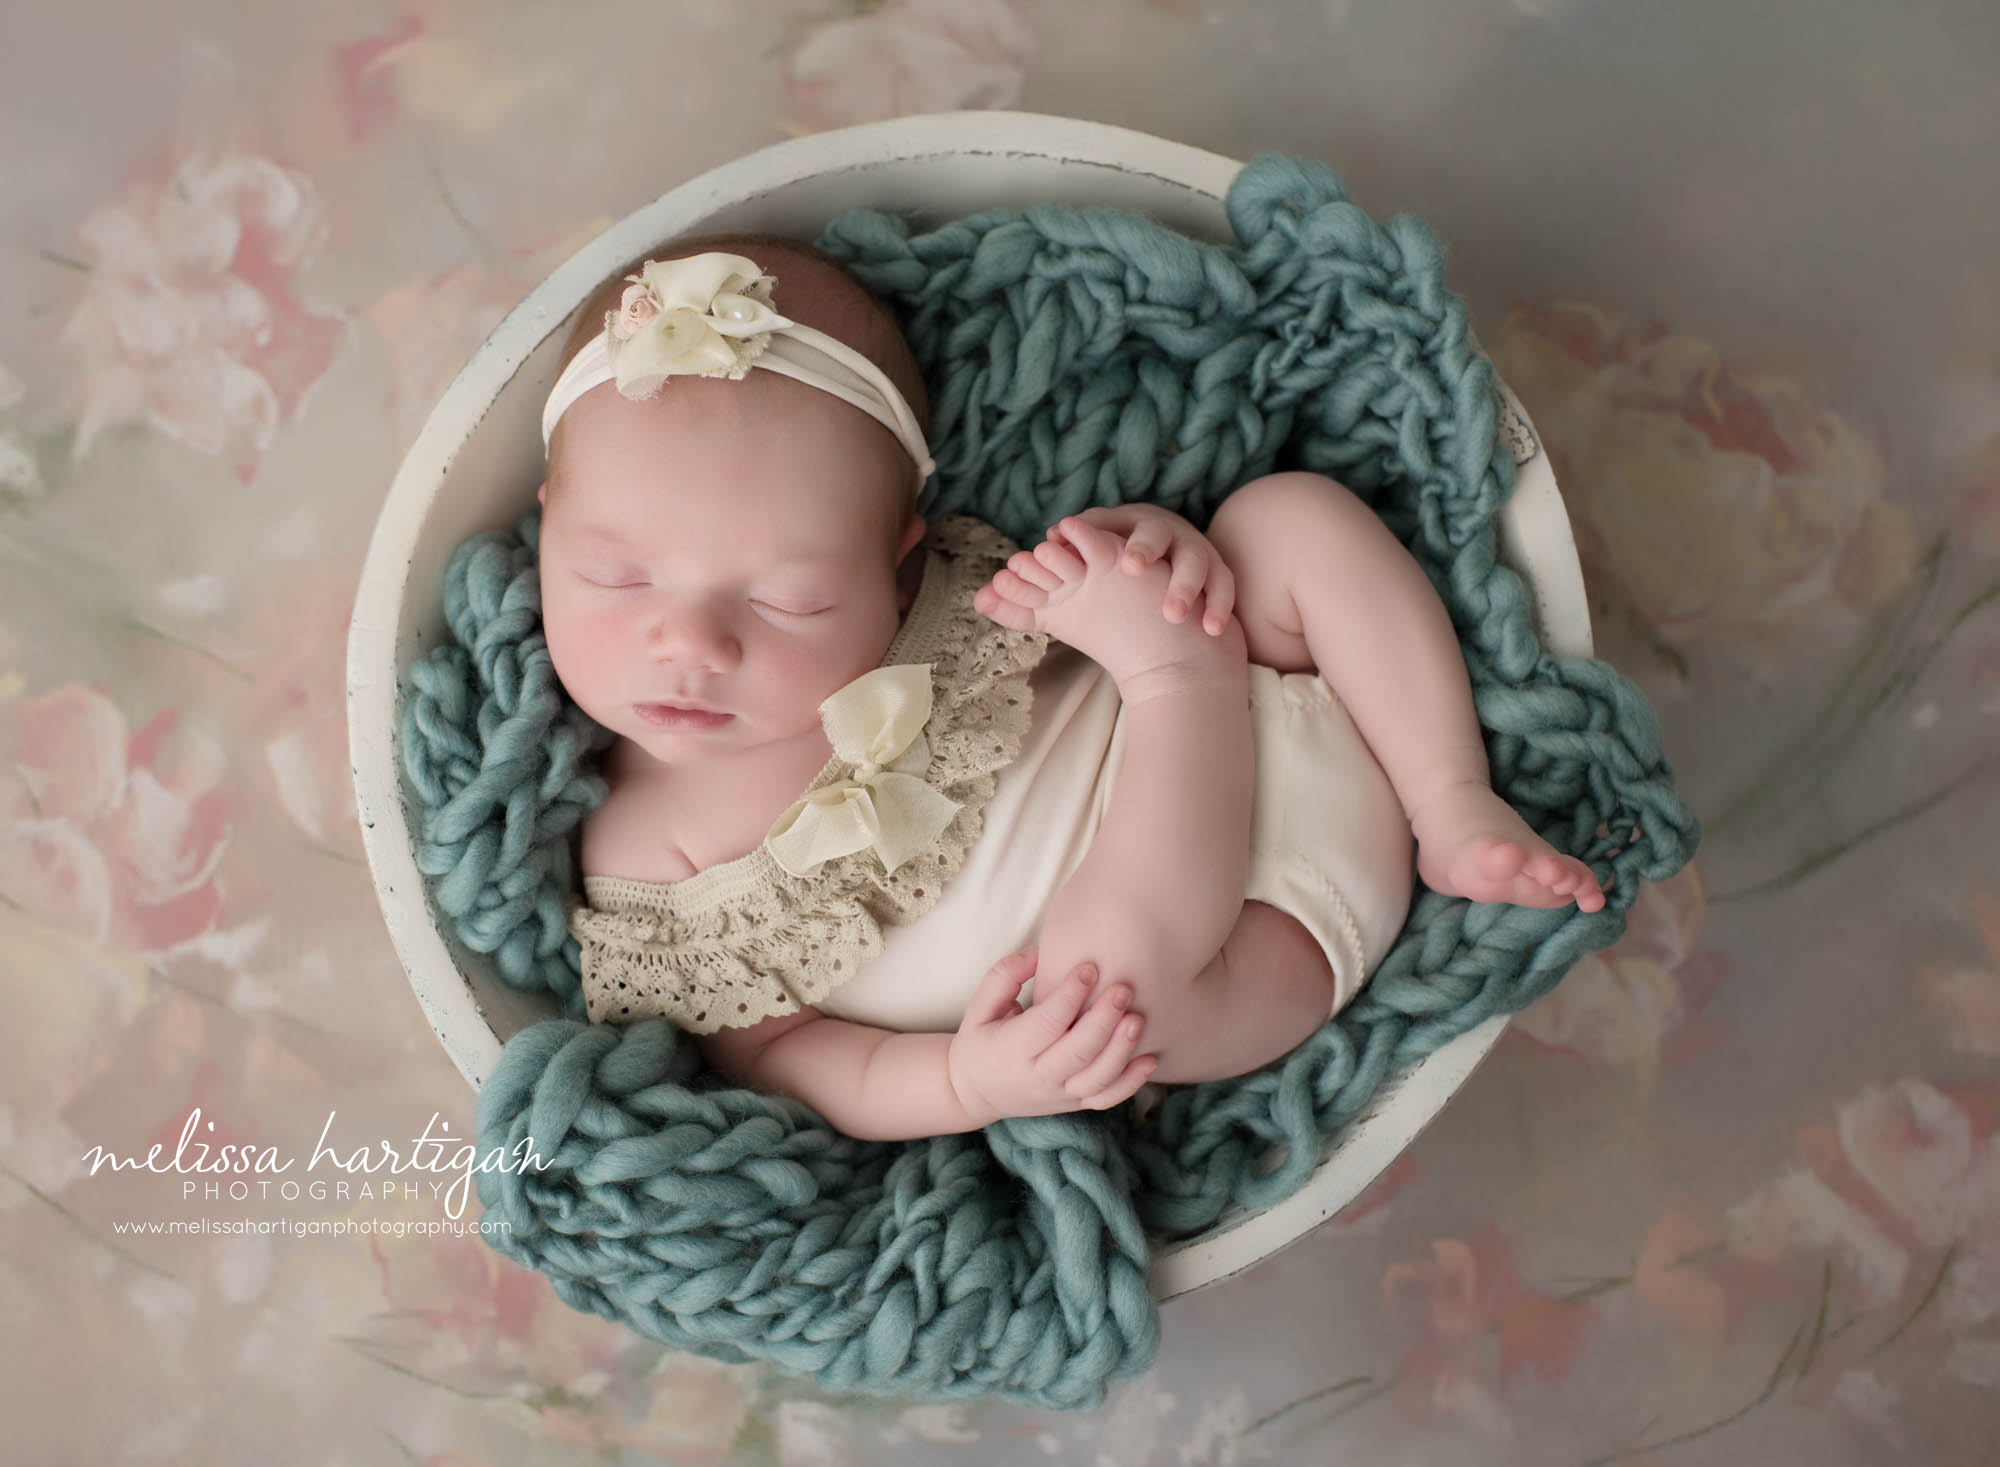 newborn baby girl posed in wooden cream bowl with teal knitted chunky layer wrap wearing cream romper outfit with flower headband